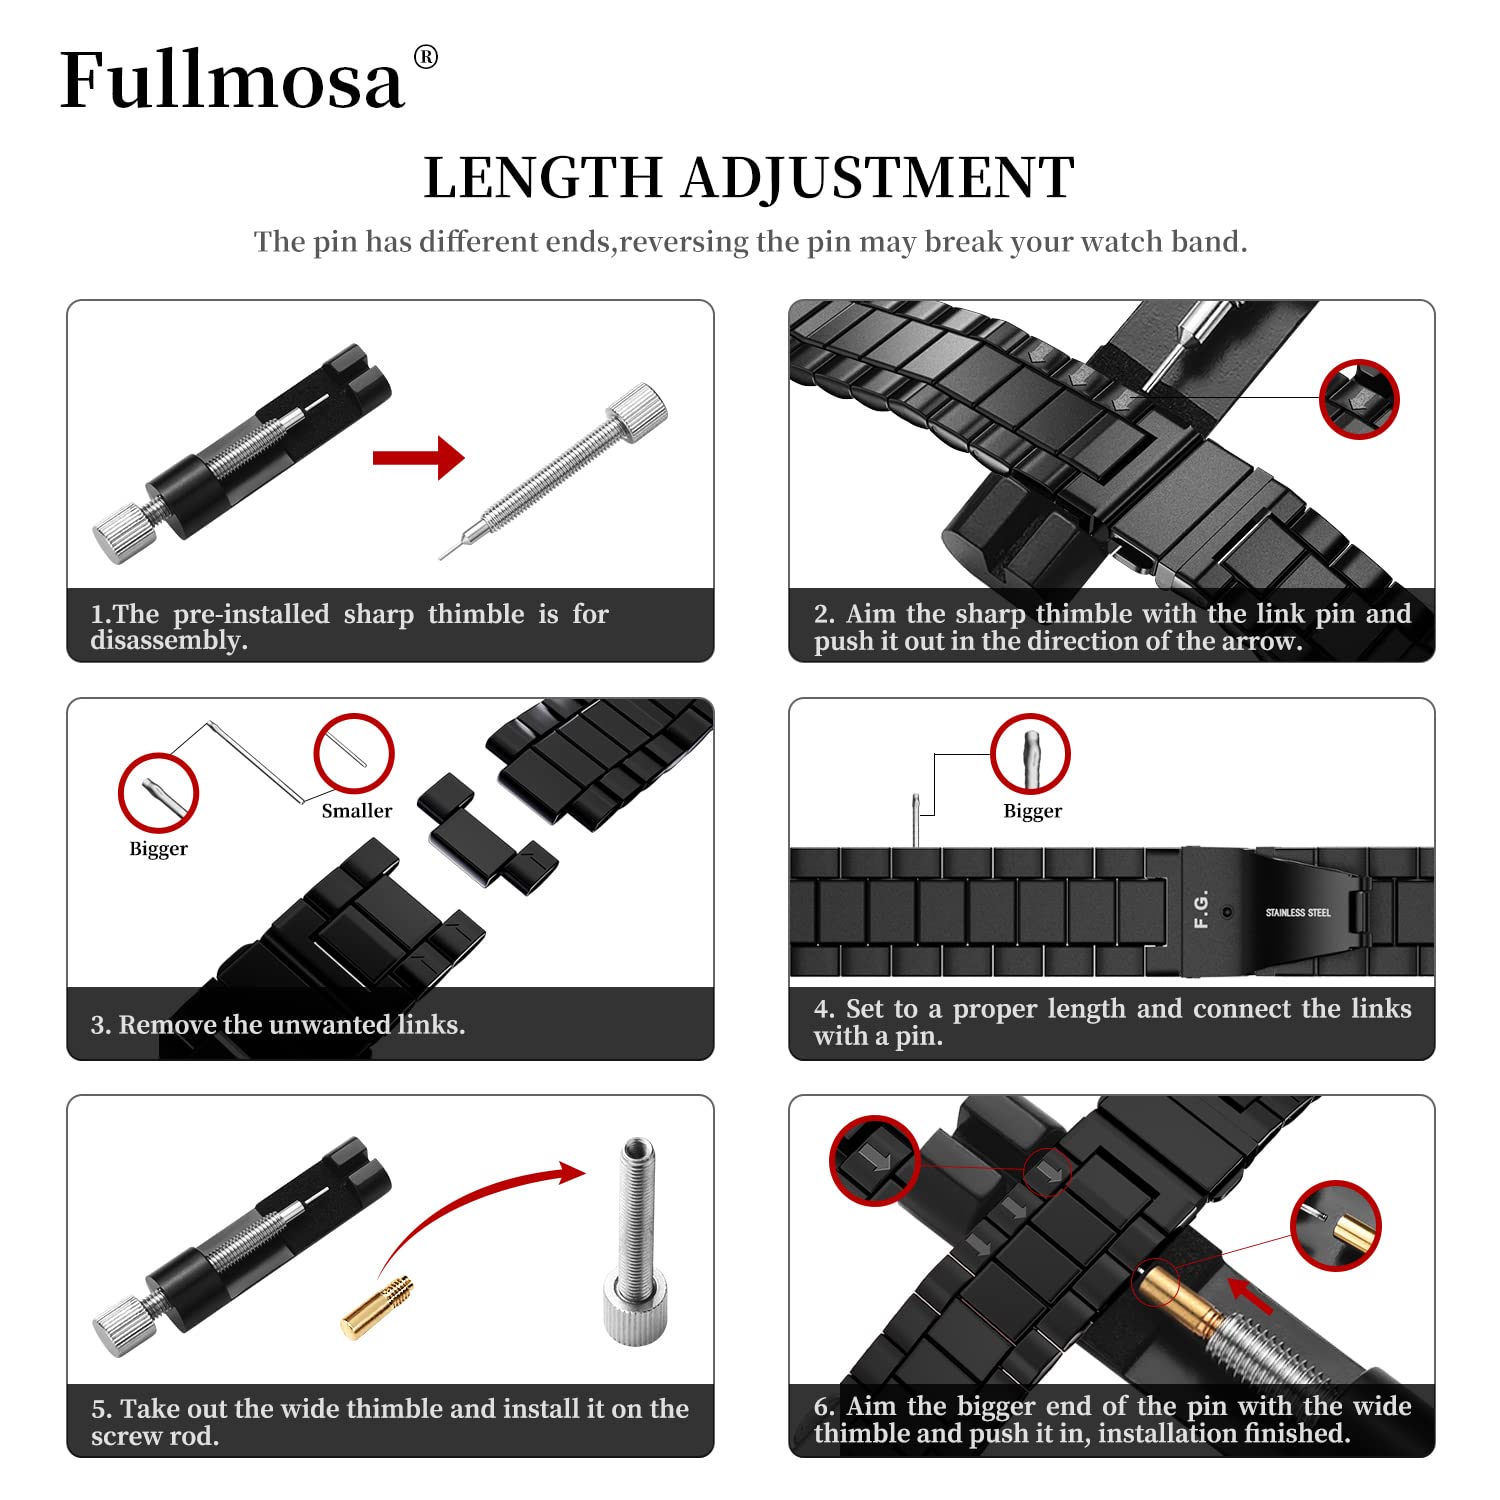 Fullmosa 20mm Stainless Steel Watch band Compatible with Samsung Galaxy Watch 5 40mm 44mm/Pro 45mm,Galaxy Watch 4 40mm 44mm/Classic 46mm 42mm(2021),Galaxy Watch 3 41mm/Watch 42mm/Active 2 40mm, Black